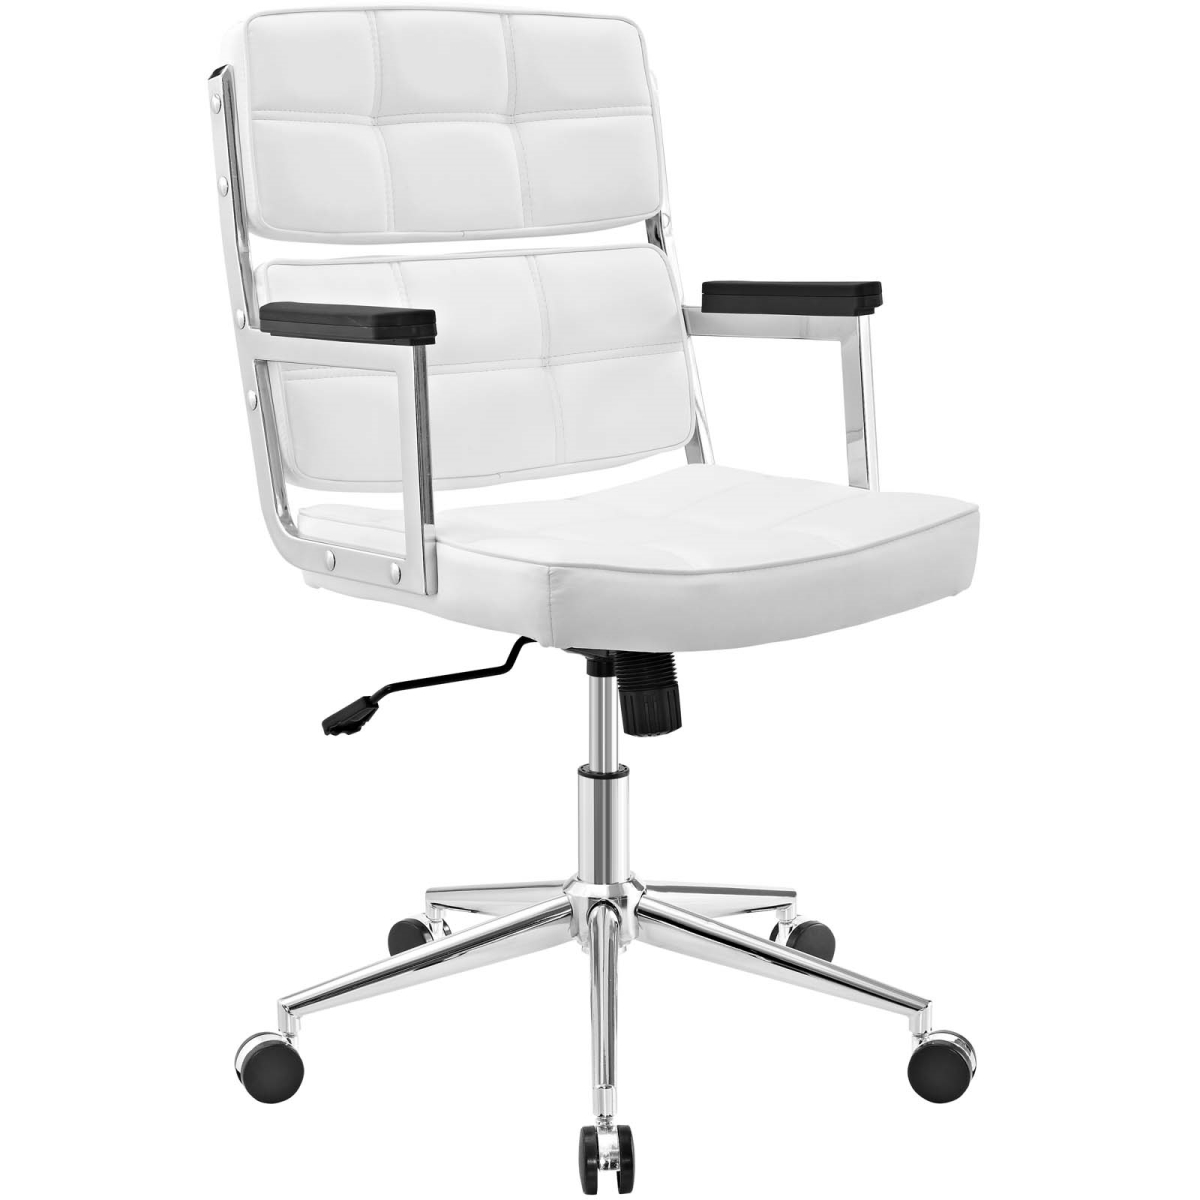 Modway Eei-2685-whi 37 - 39.5 H X 26 W X 25 L In. Portray Highback Upholstered Vinyl Office Chair, White